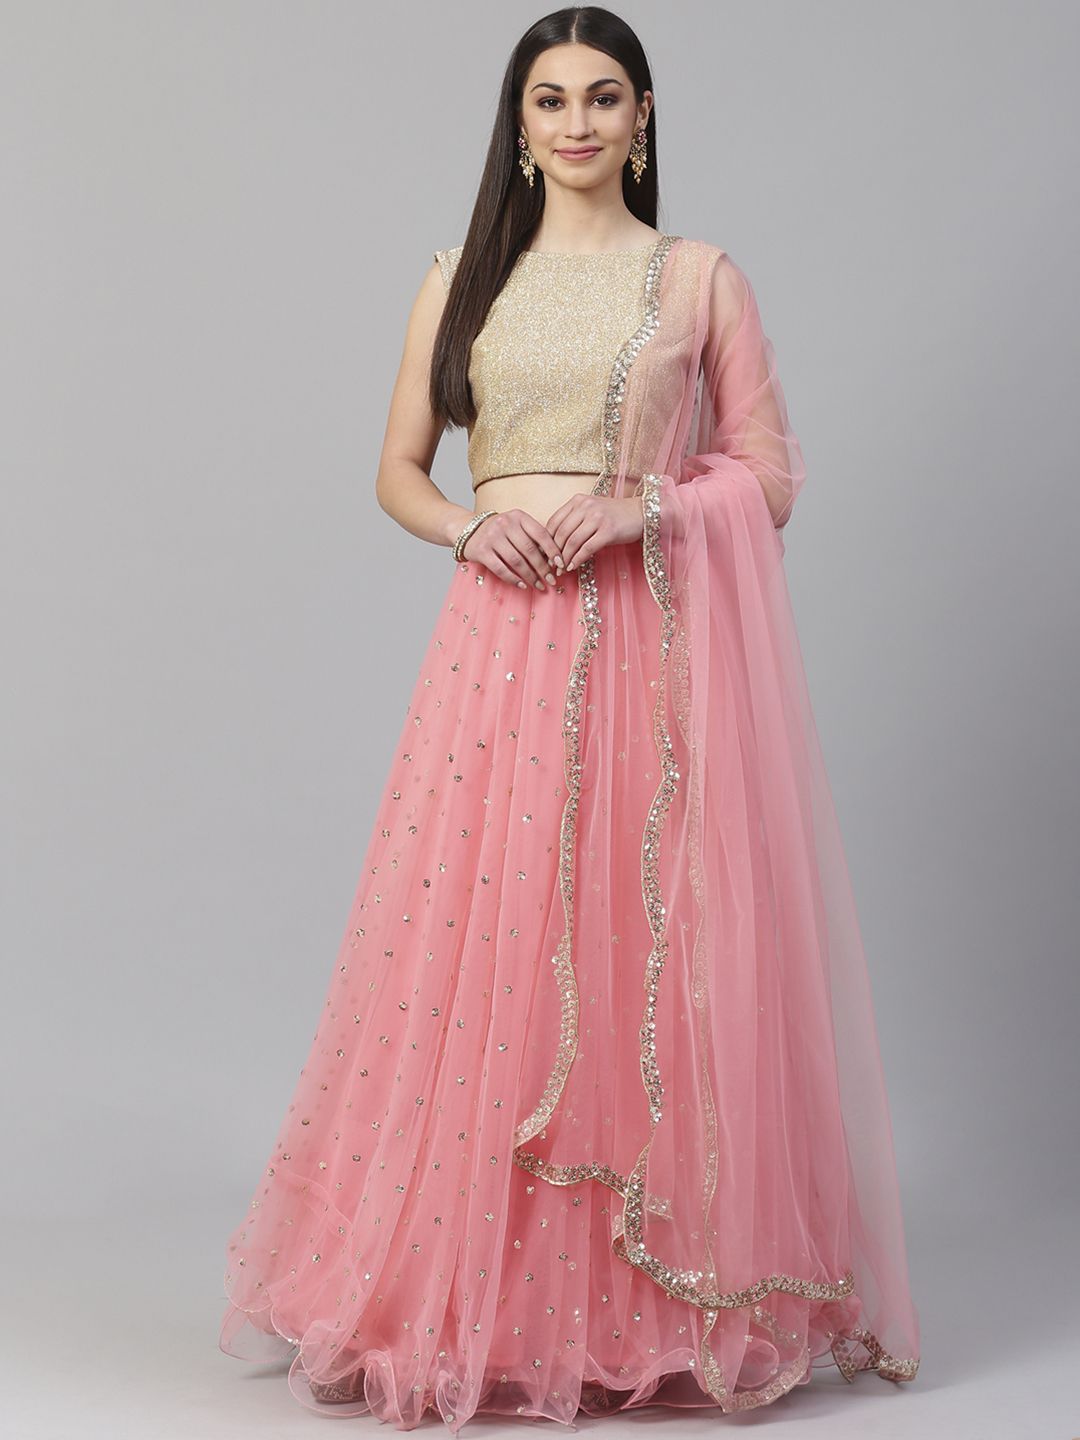 Readiprint Fashions Pink & Golden Sequinned Semi-Stitched Lehenga & Choli With Dupatta Price in India